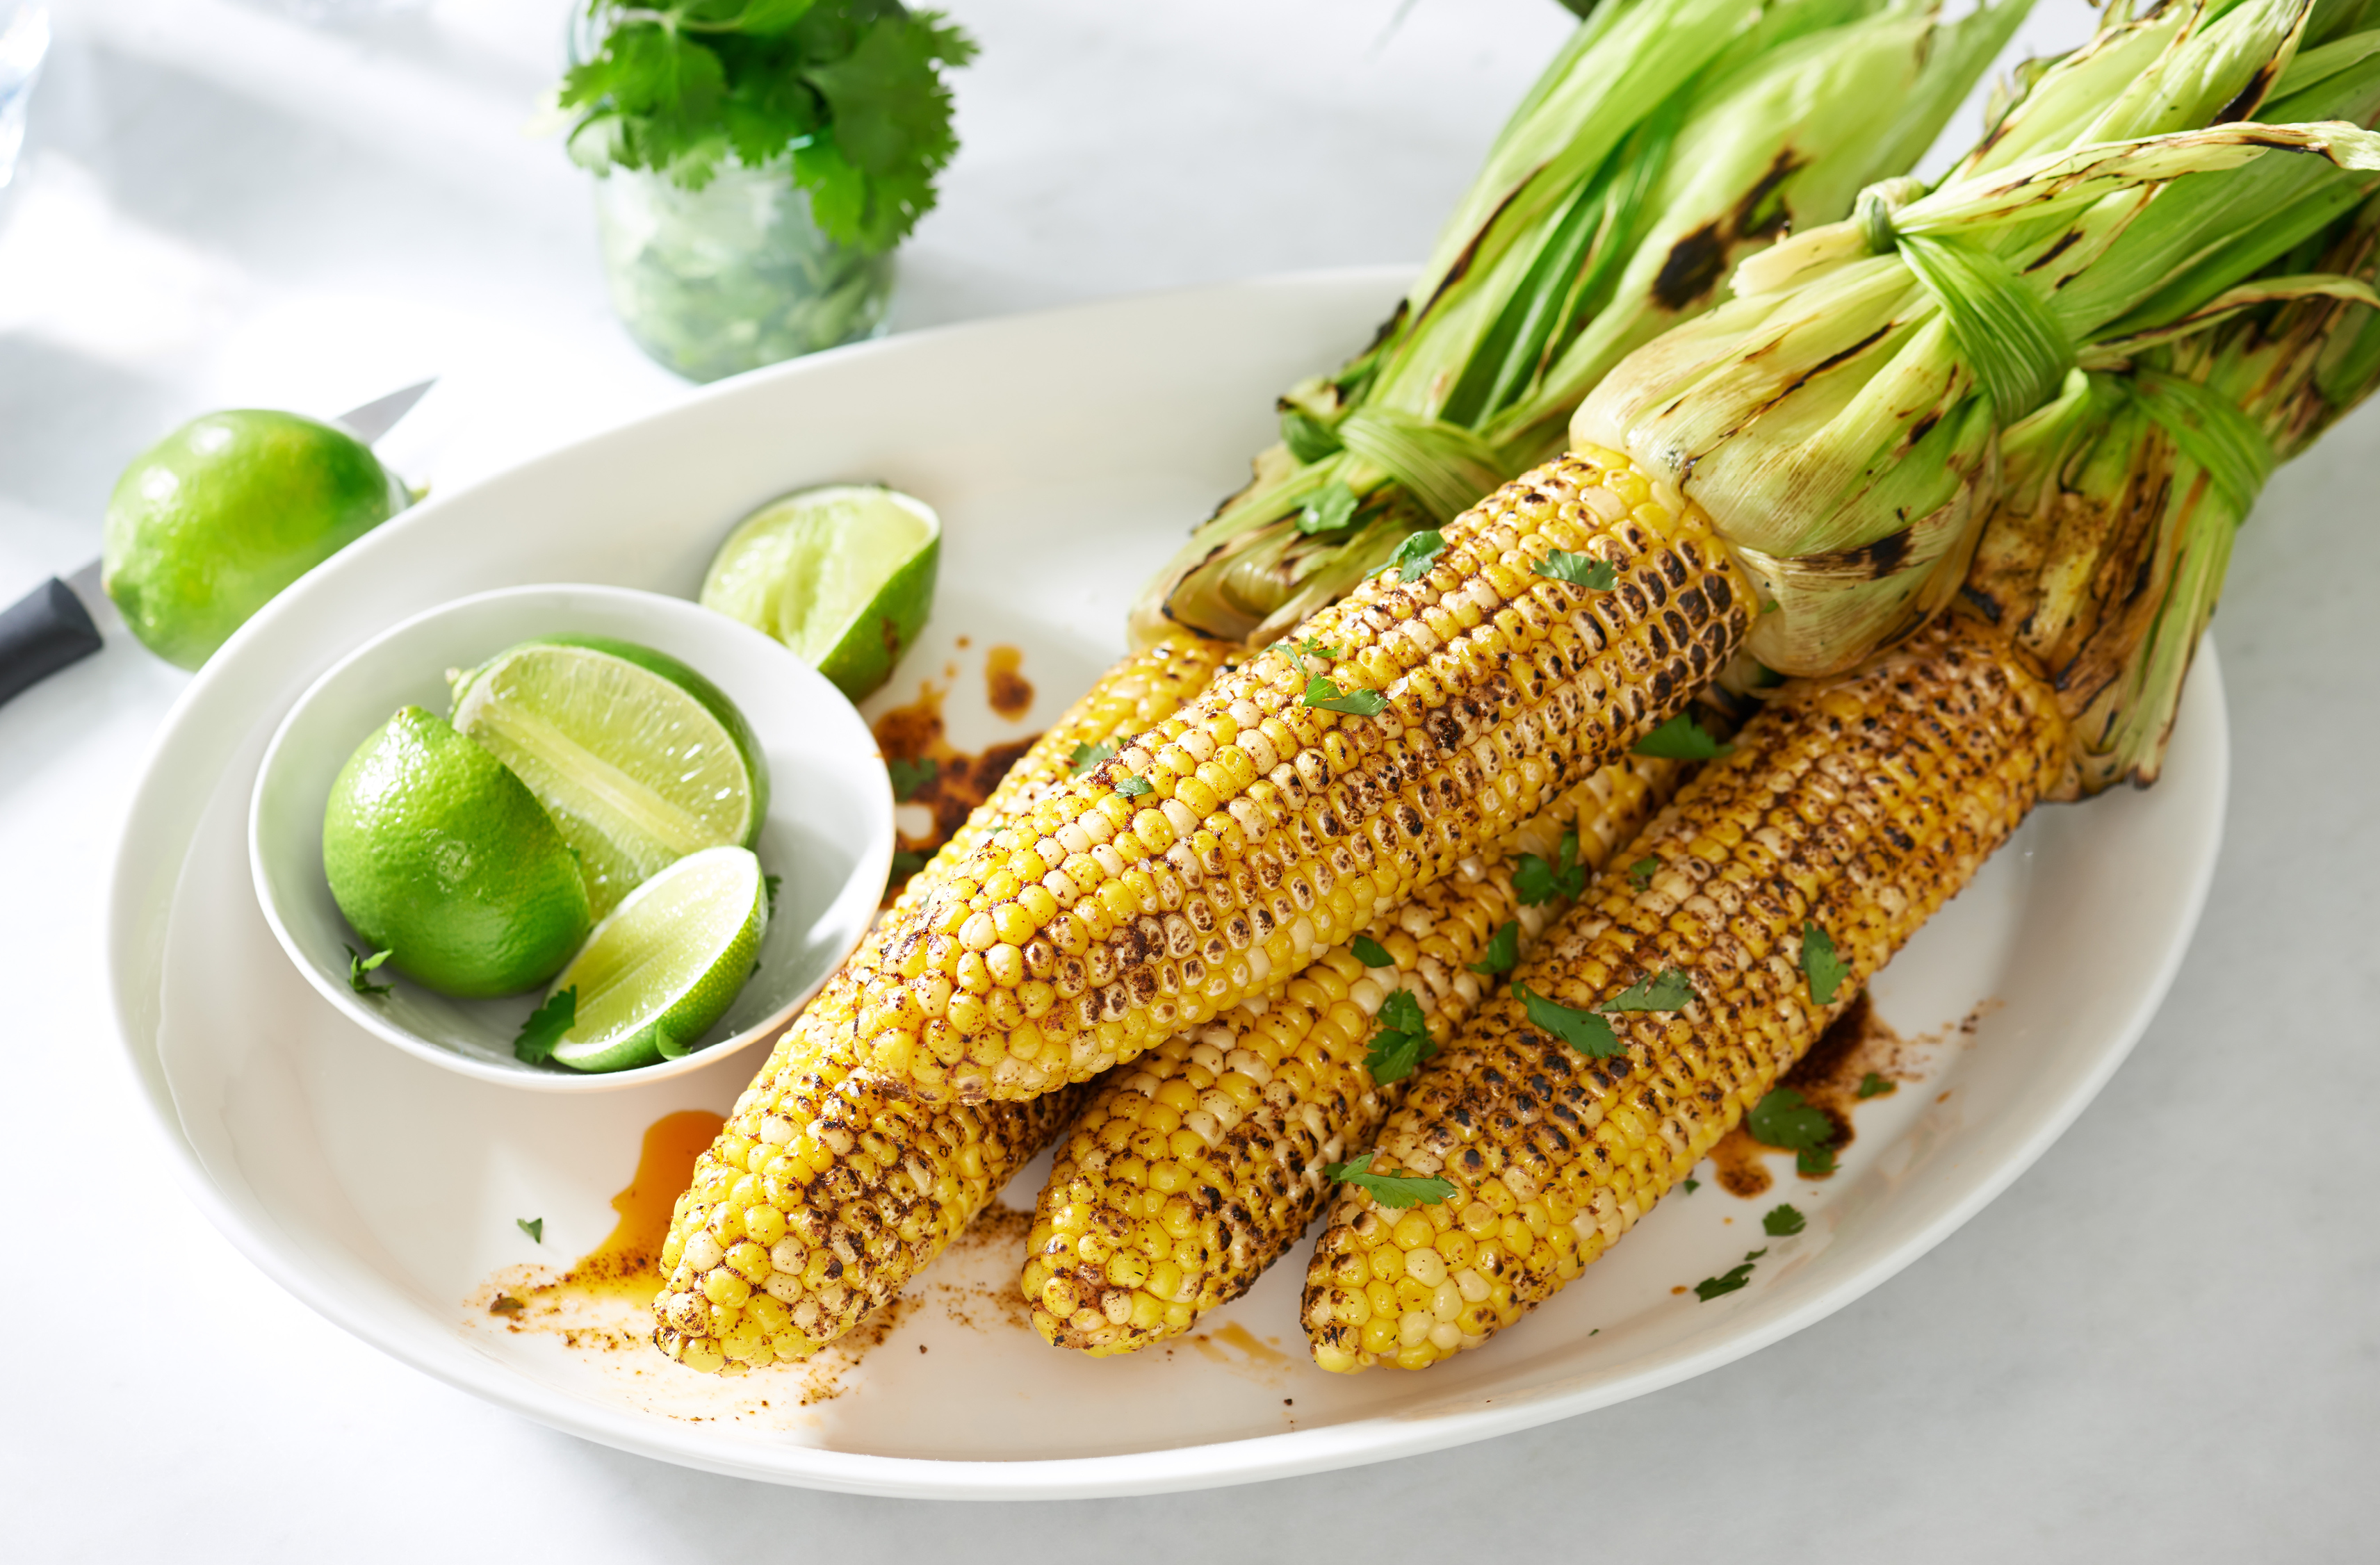 A platter with 4 ears of chili-seasoned, coconut oil-basted grilled corn

